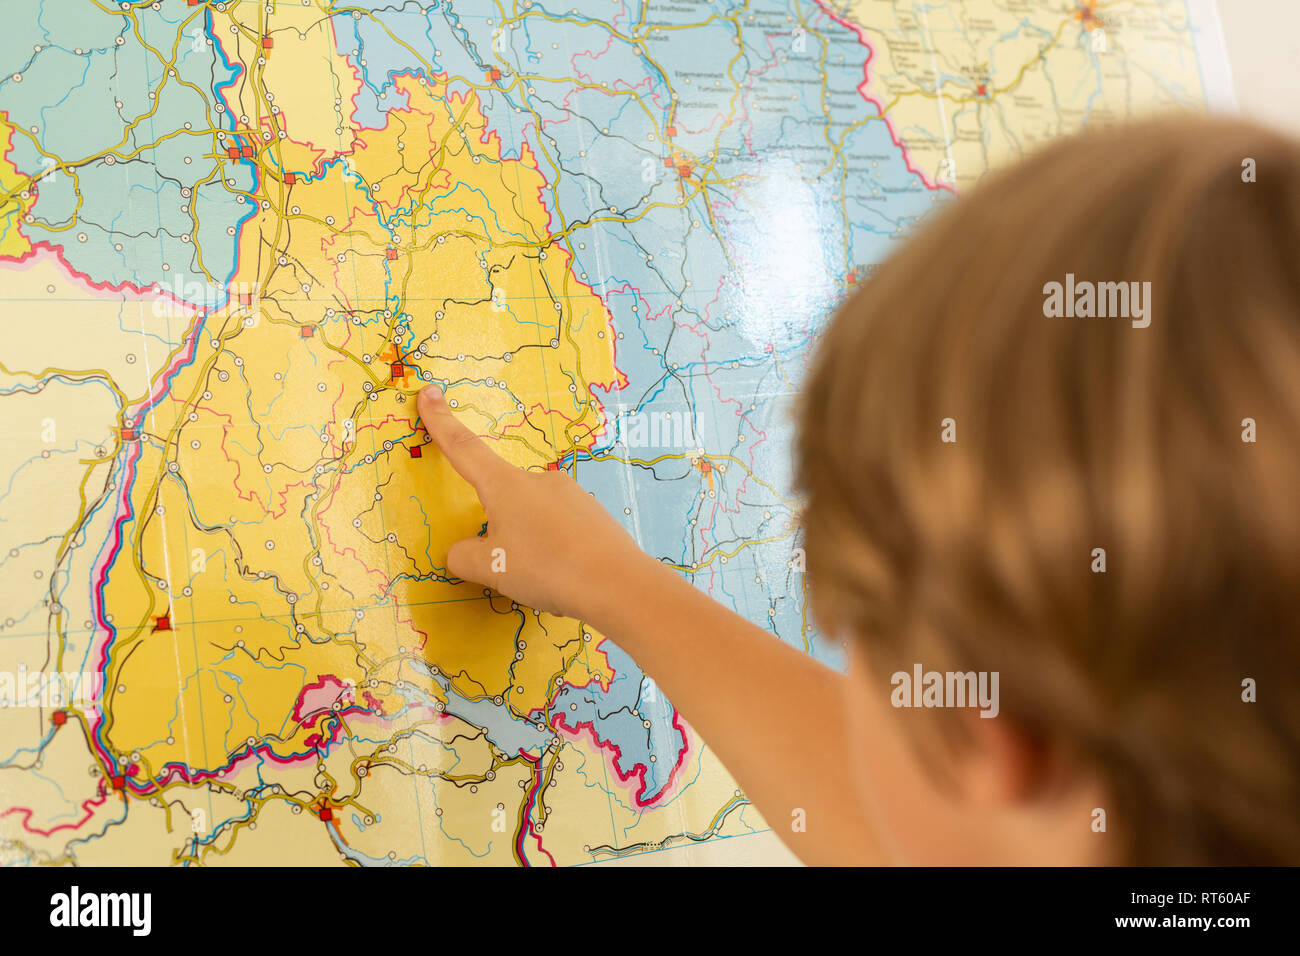 Boy pointing his finger on world map in a classroom Stock Photo